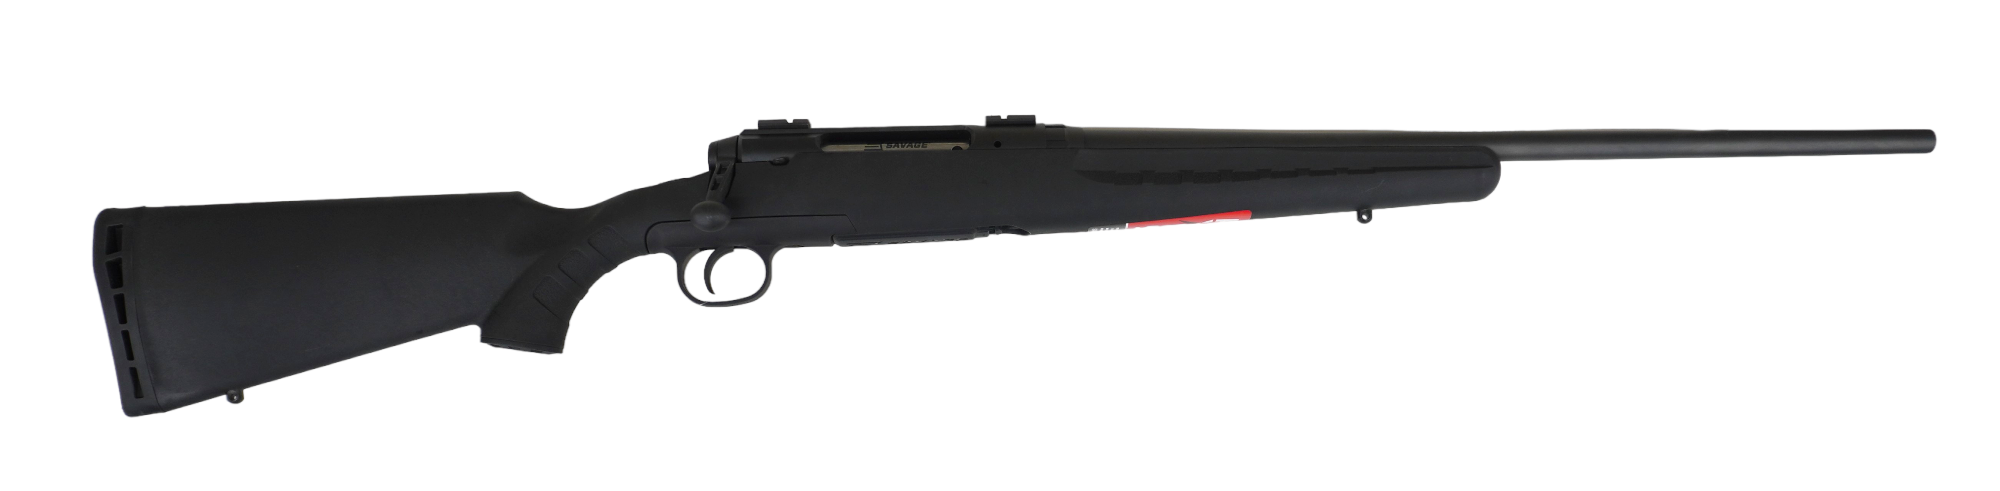 Savage Axis 223 Rem 22" Blk 4RD Rifle